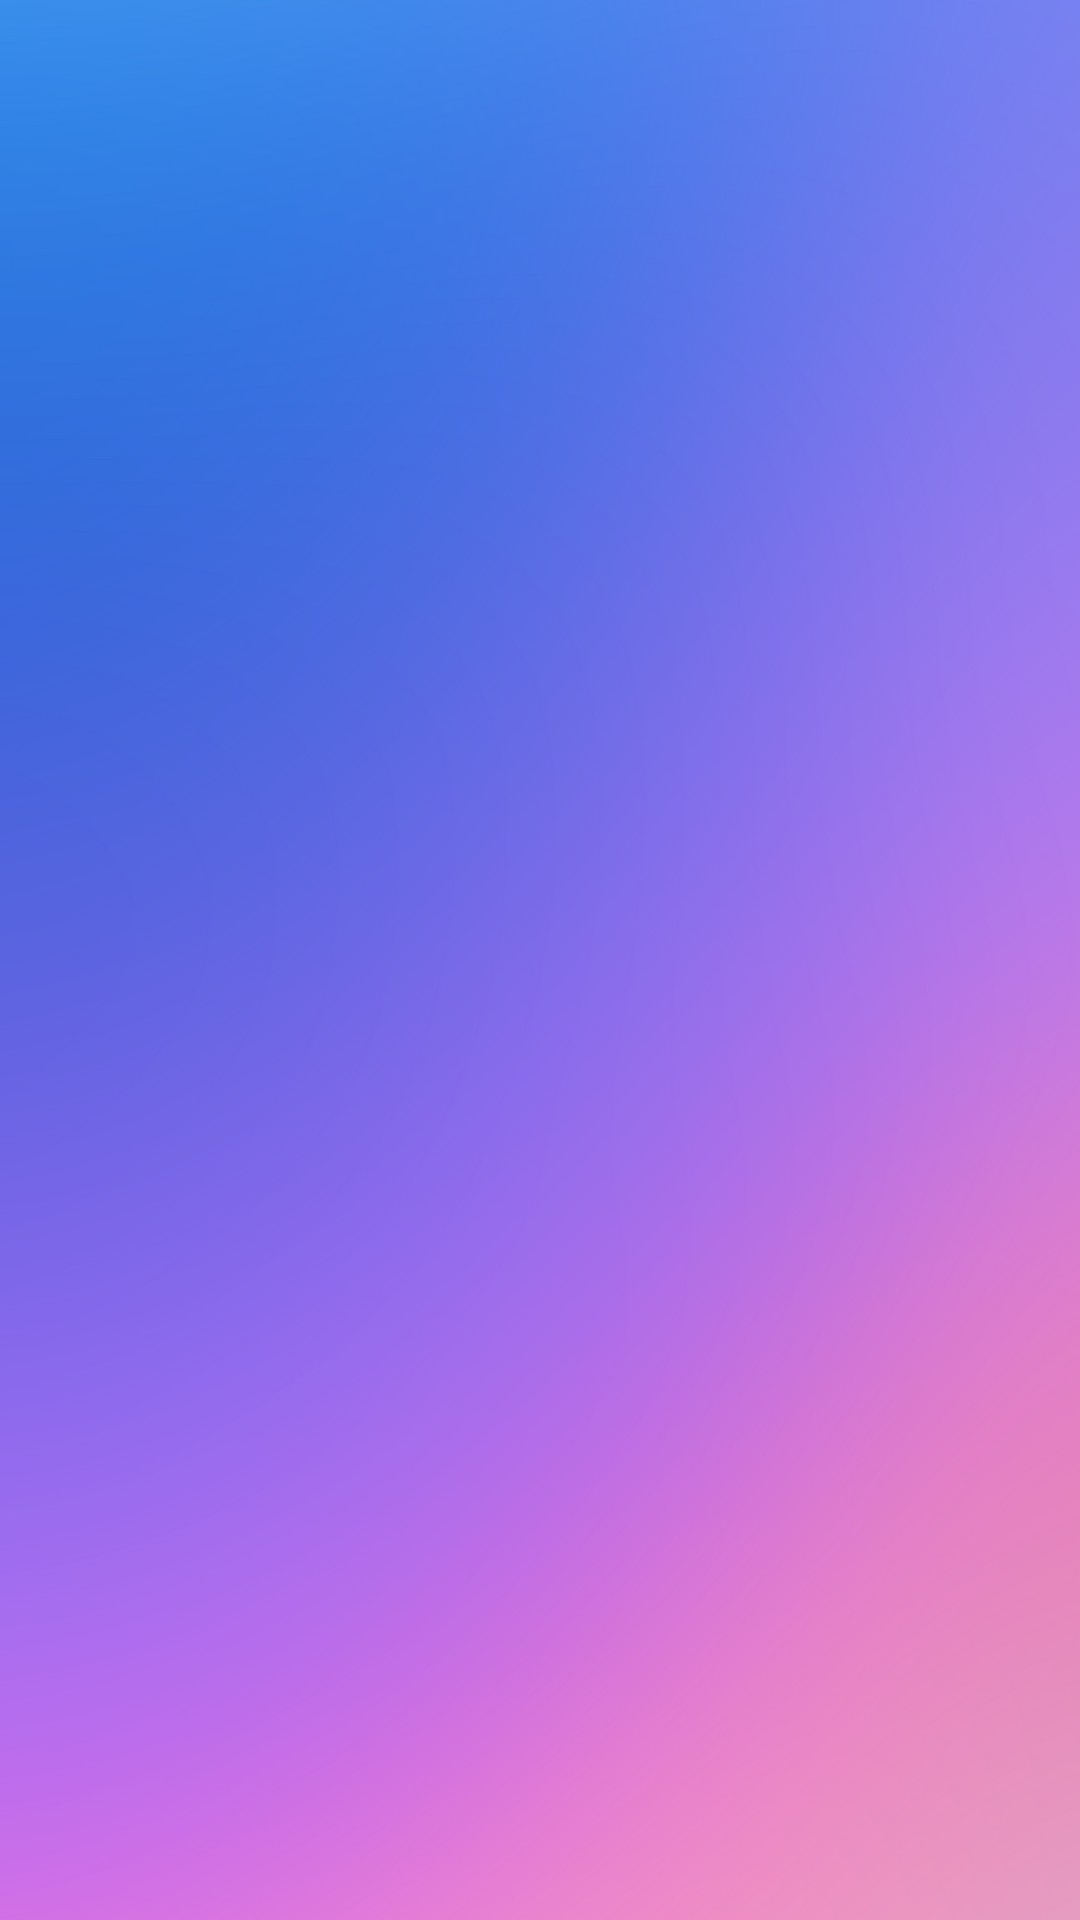 Wallpaper Gradient For Iphone With High-resolution - High Resolution Gradient Wallpaper Iphone - HD Wallpaper 